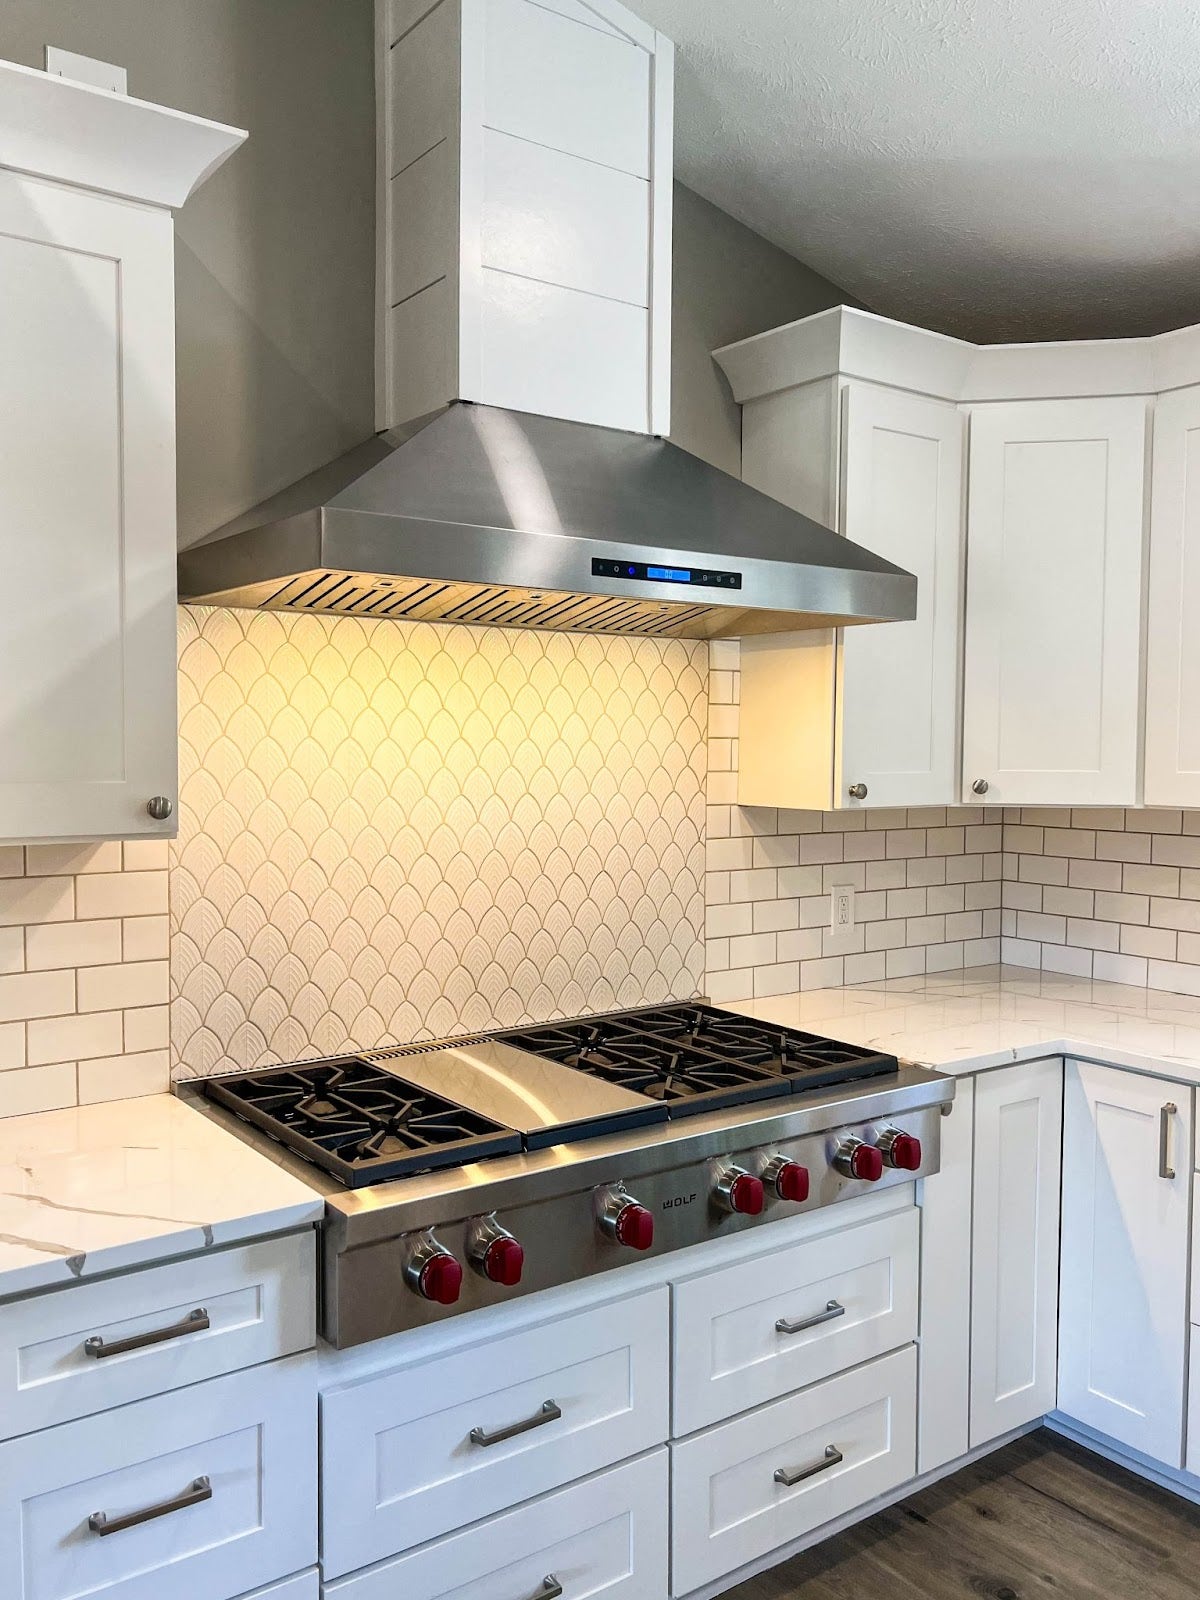 White cabinets and a stainless steel stove in a clean kitchen. - Proline Range Hoods - prolinerangehoods.com 